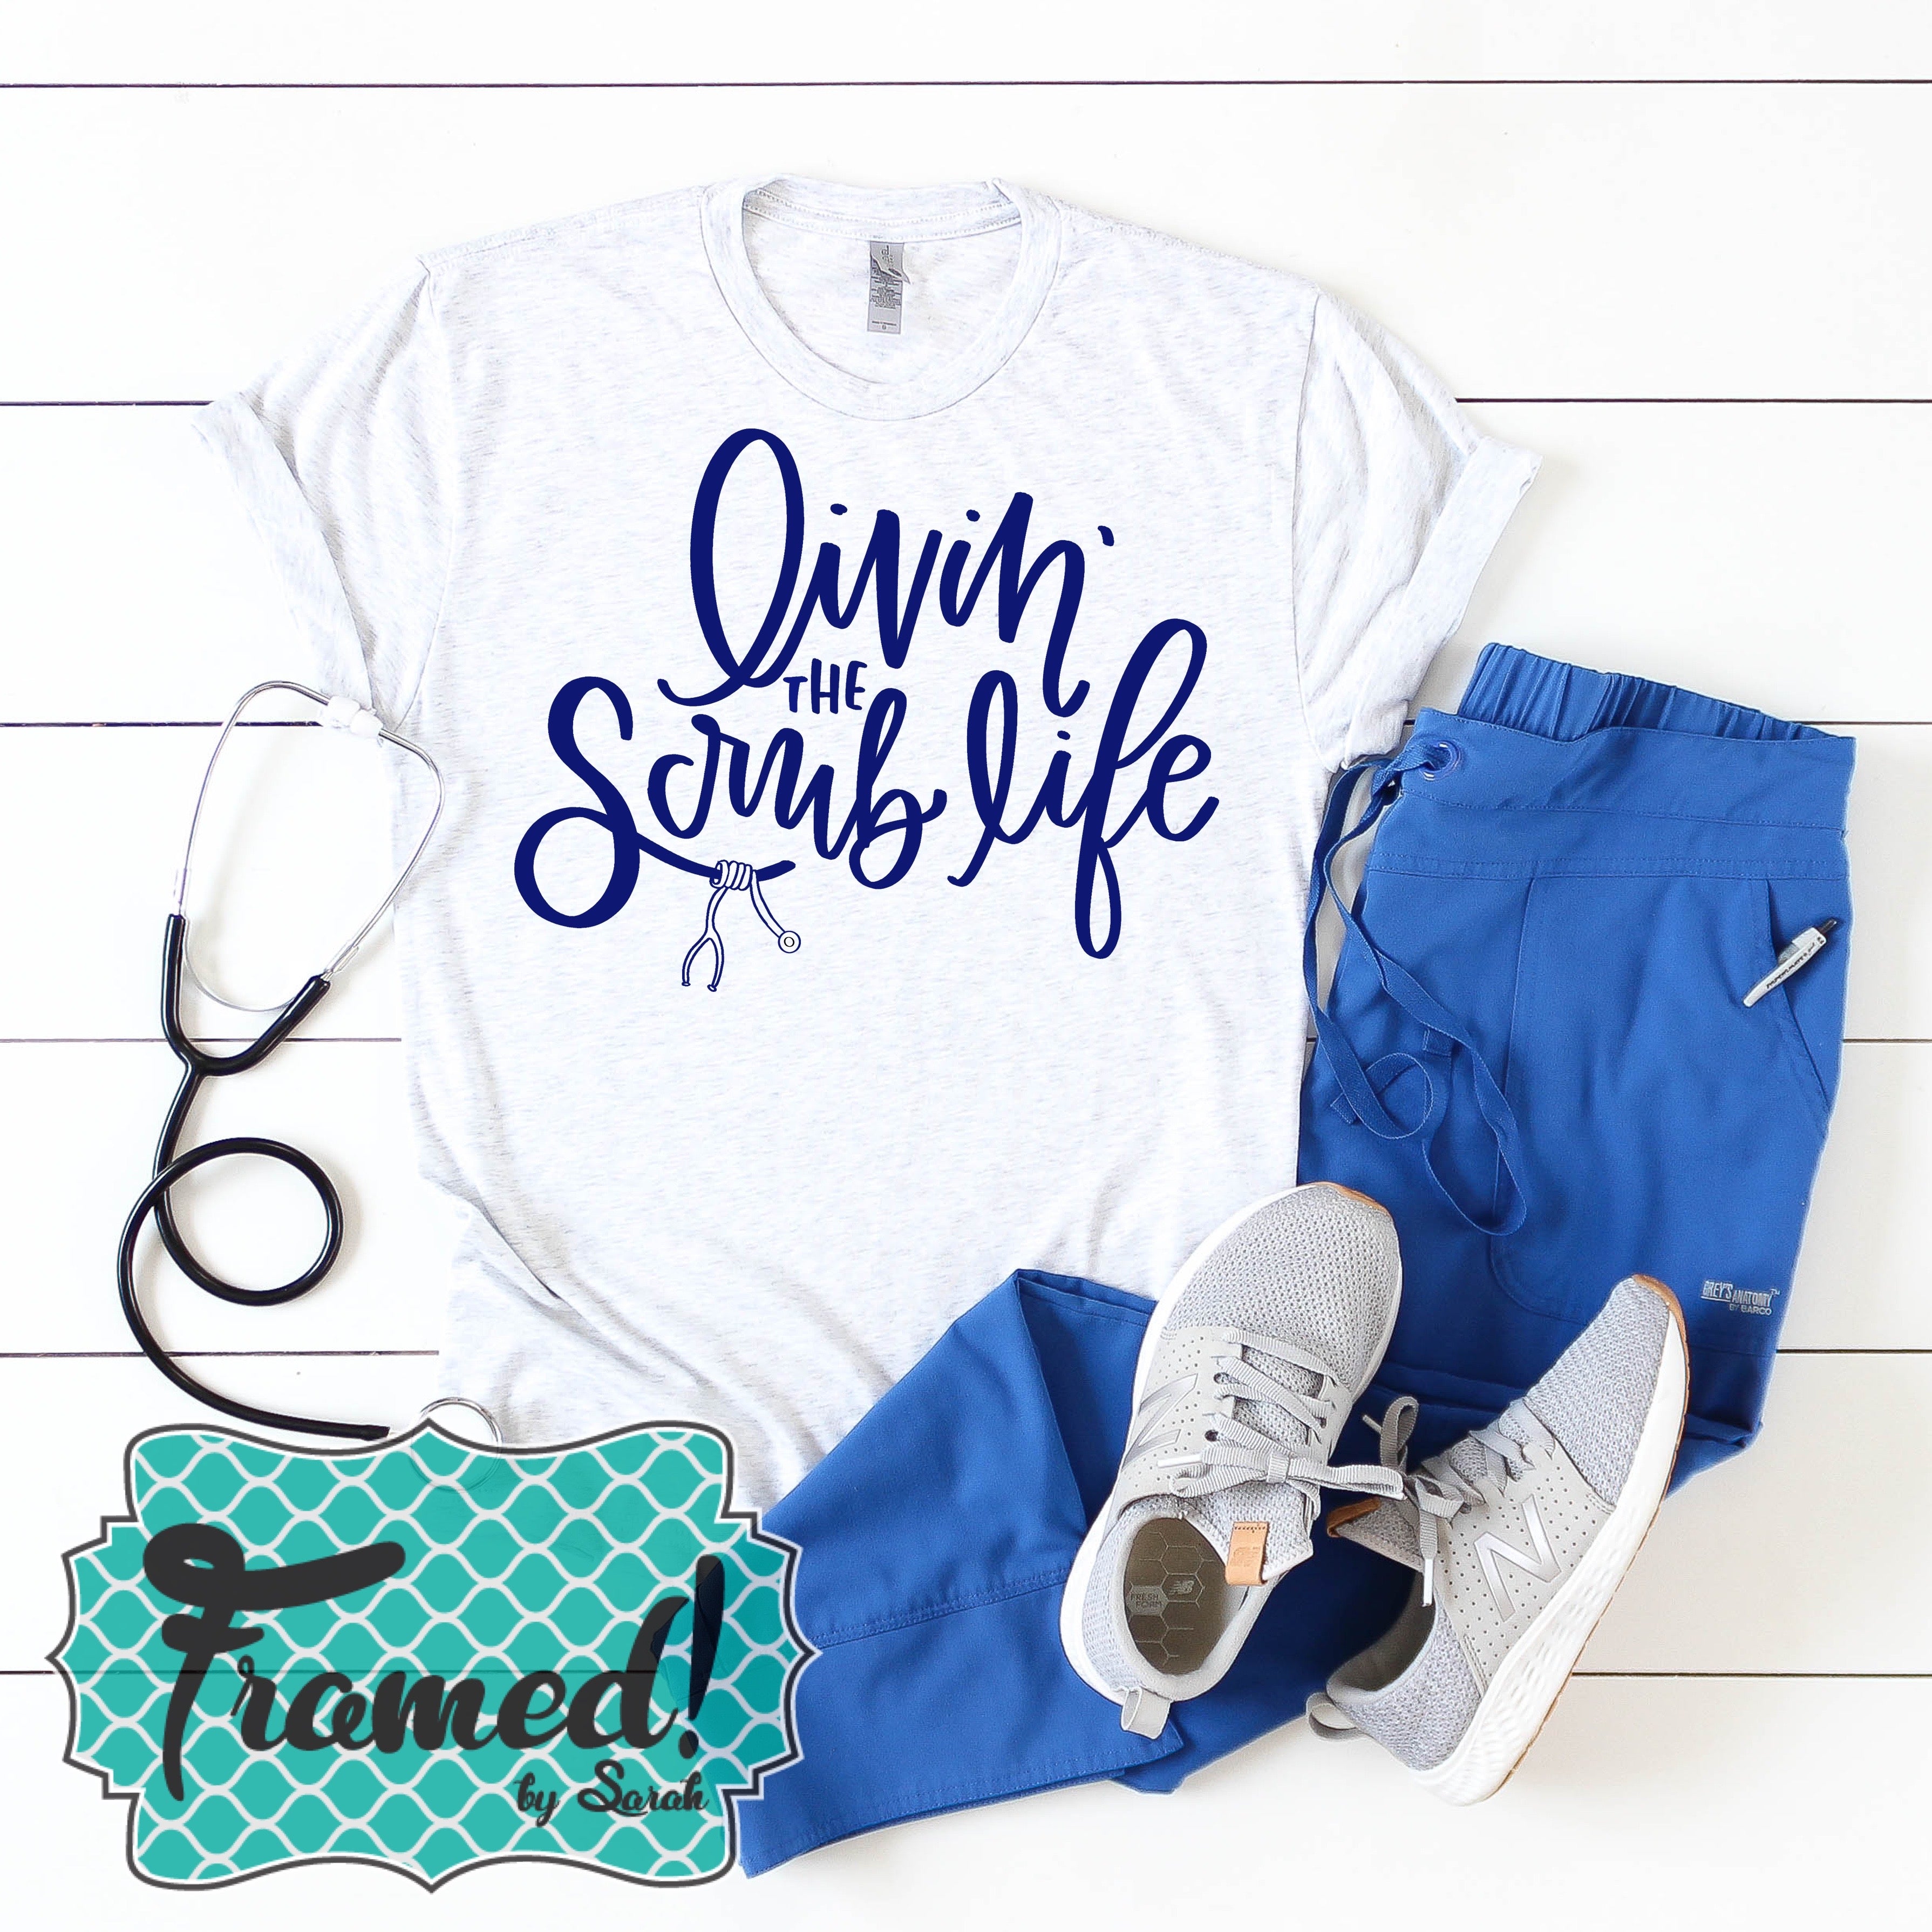 Livin' That Scrub Life Tee (Large-3X only)